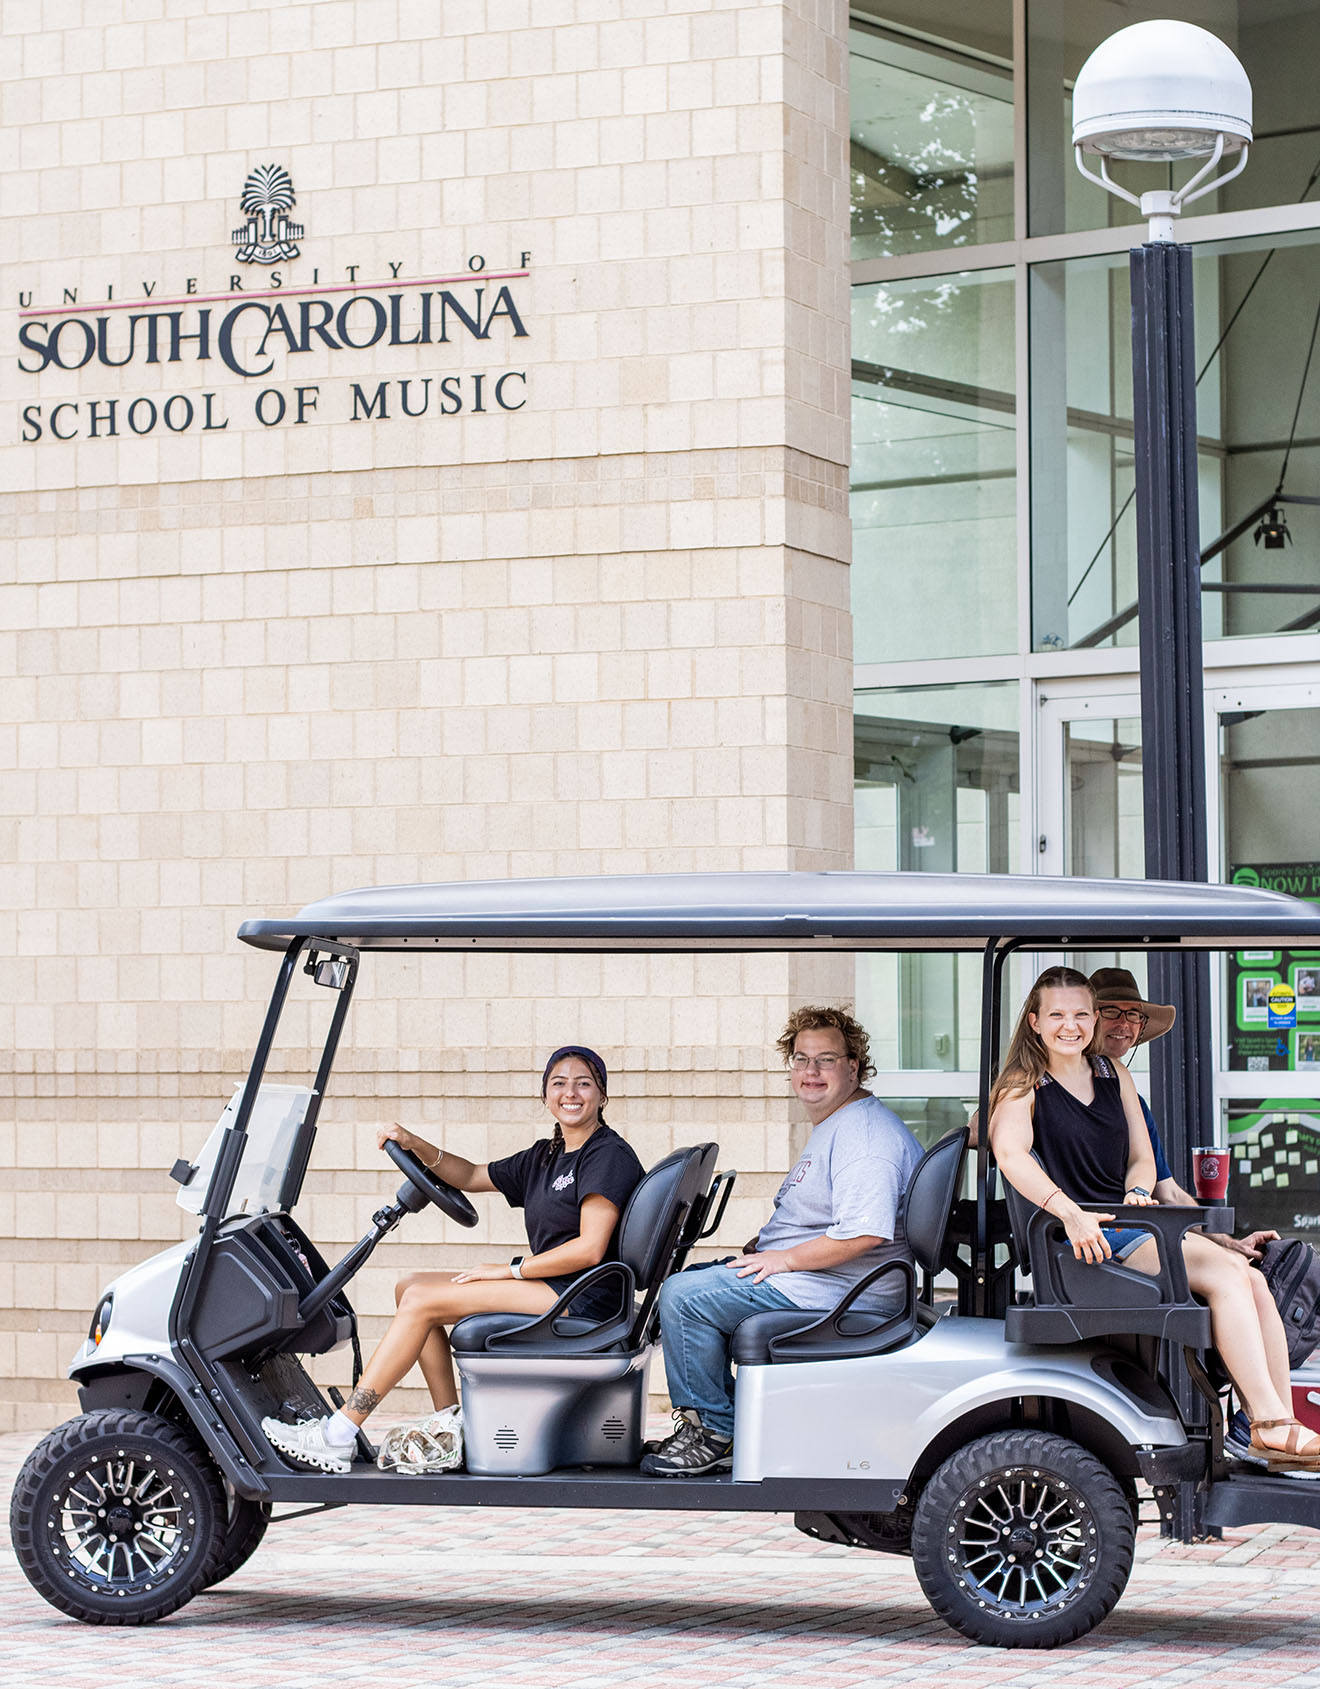 Students with disabilities ride in a golf cart in front of the University of South Carolina School of Music building.